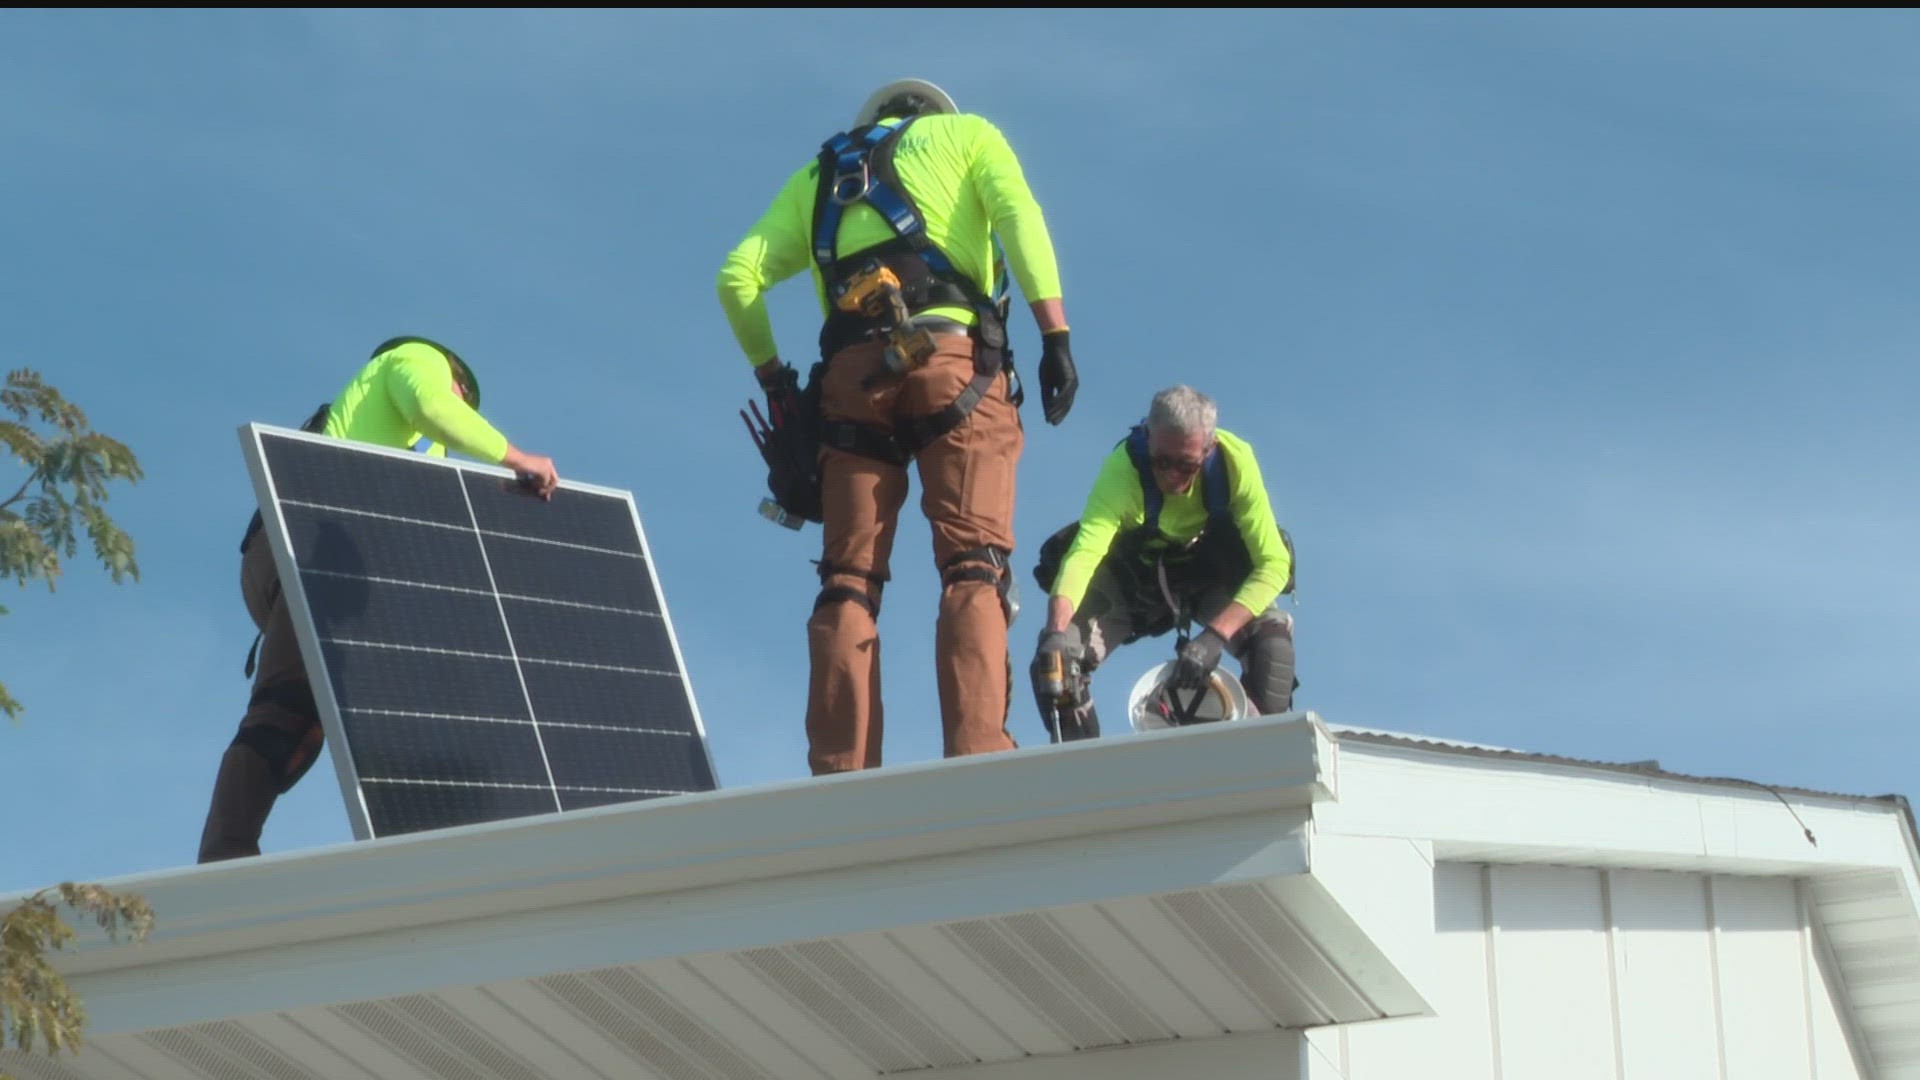 The Goddard School of Albertville is choosing solar panels to light up classrooms. School leaders say that the curriculum will include education on clean energy.